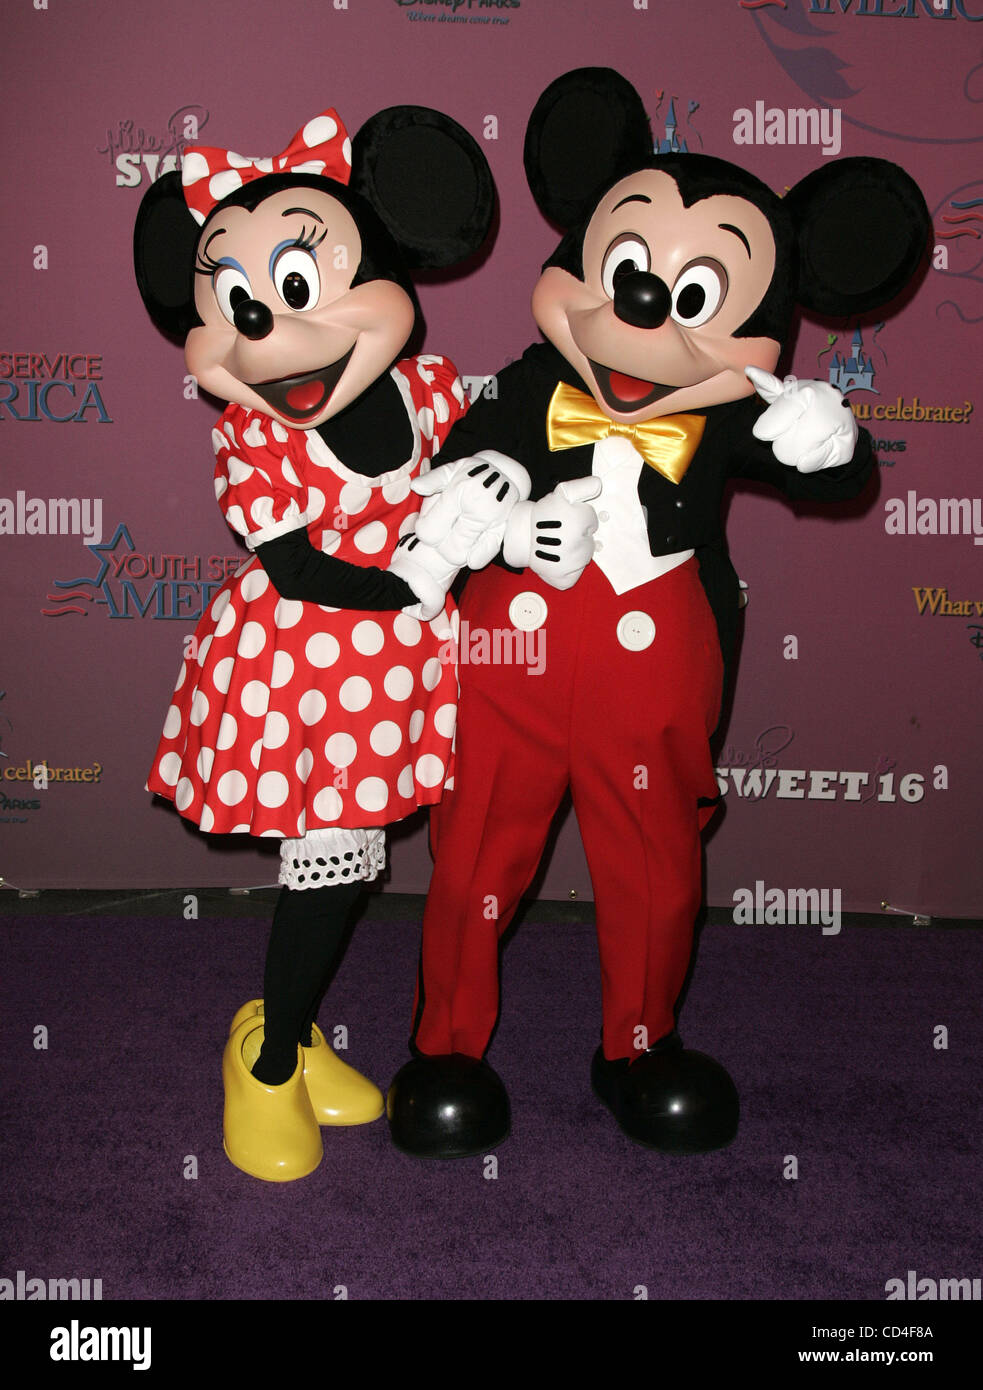 Oct 05, 2008 - Anaheim, California, USA - MICKEY and MINNIE MOUSE at the Miley Cyrus Sweet 16 Birthday Party held at Disneyland in Anaheim. (Credit Image: © Lisa O'Connor/ZUMA Press) Stock Photo